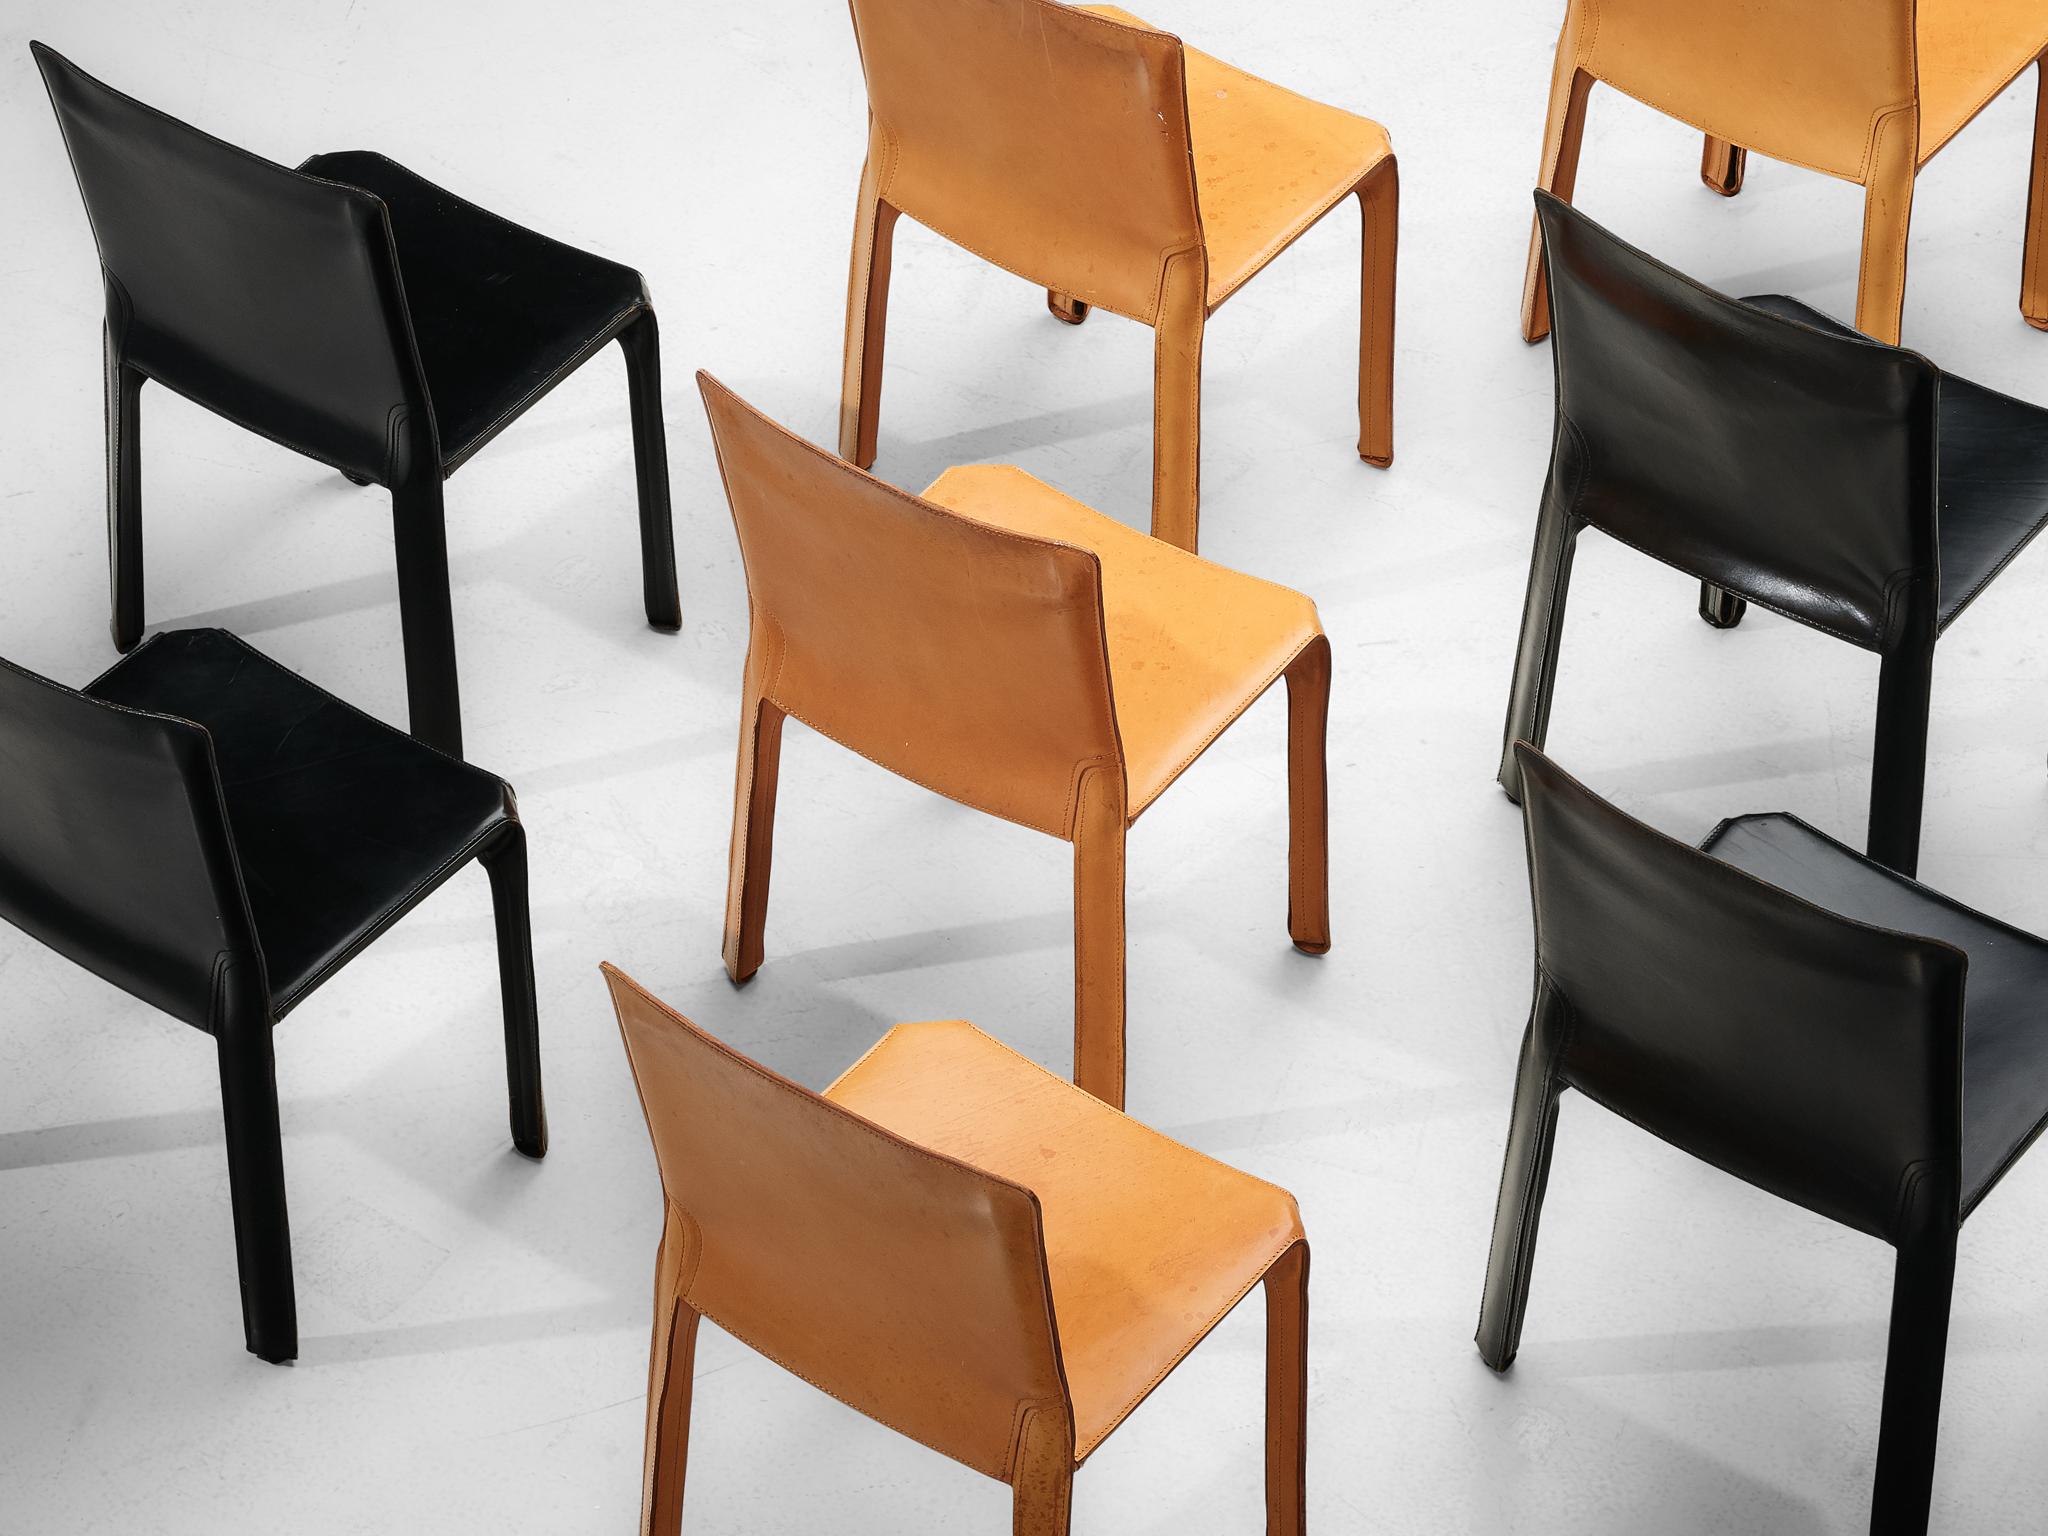 Steel Set of 8 Mario Bellini for Cassina 'Cab' Chairs